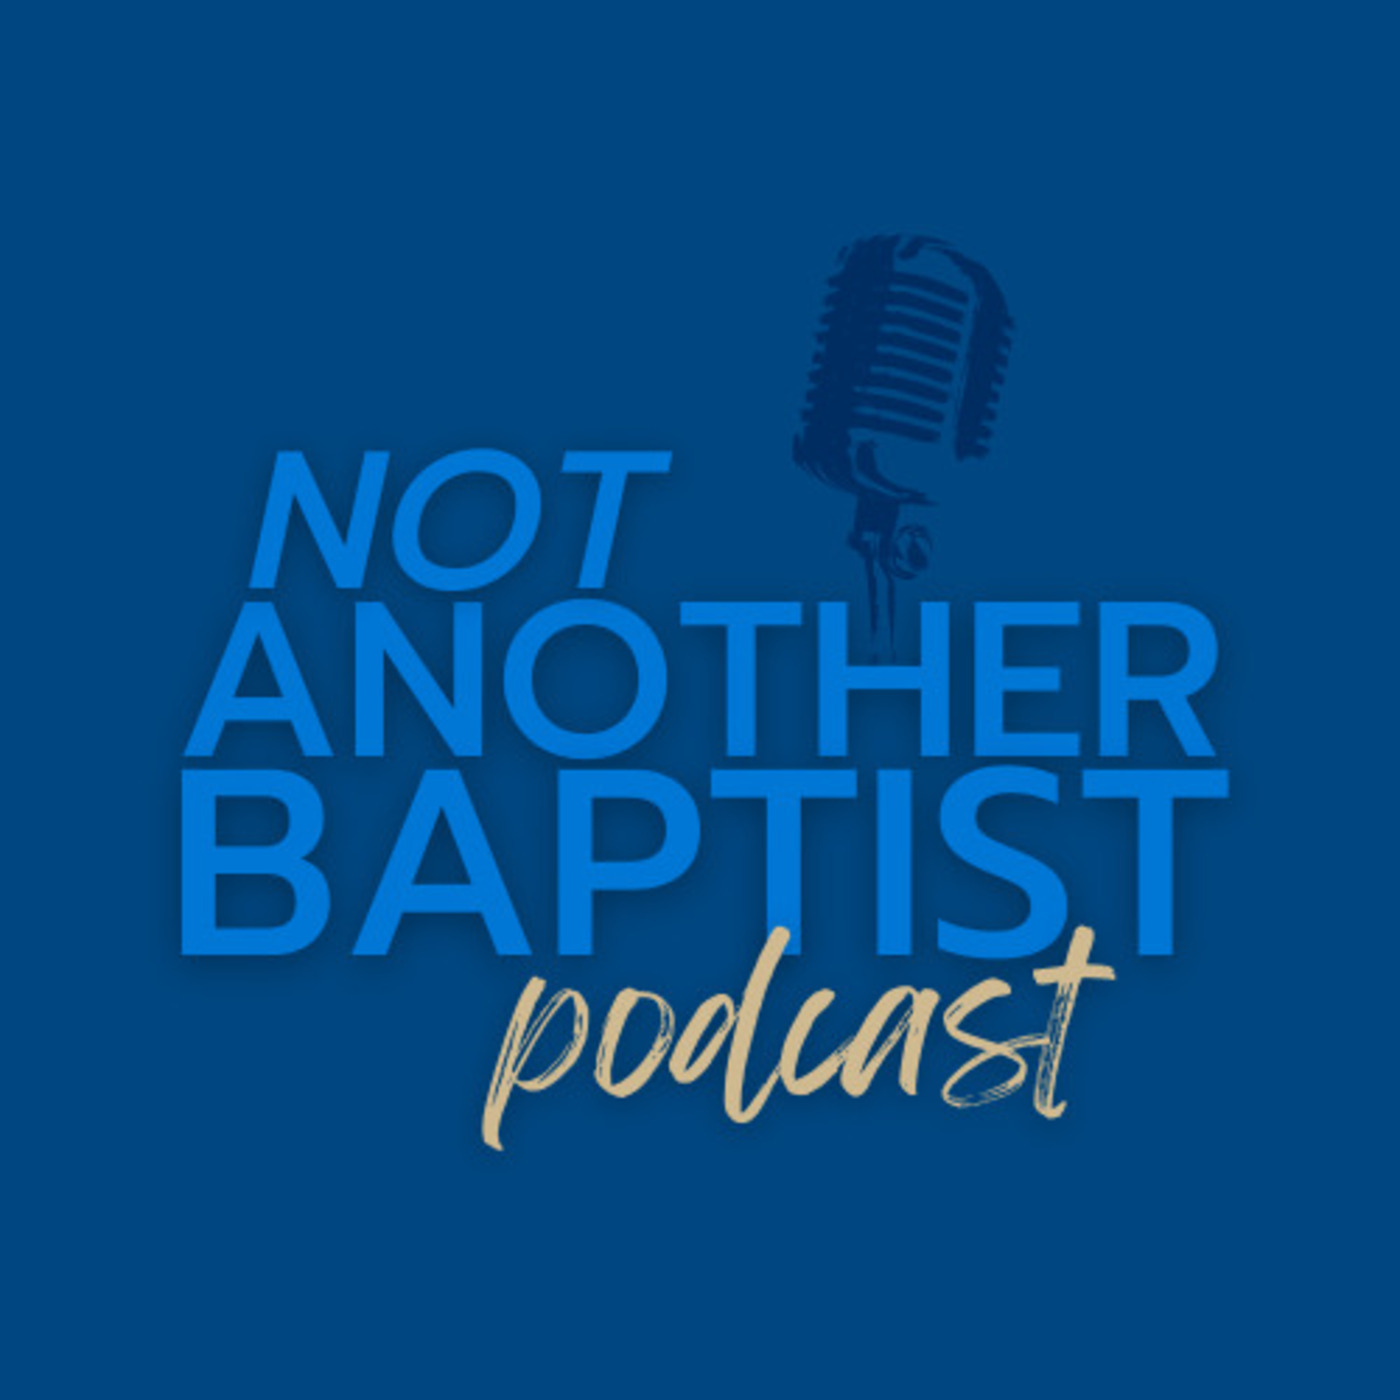 Episode 414: Episode 339: On the Importance of Worship